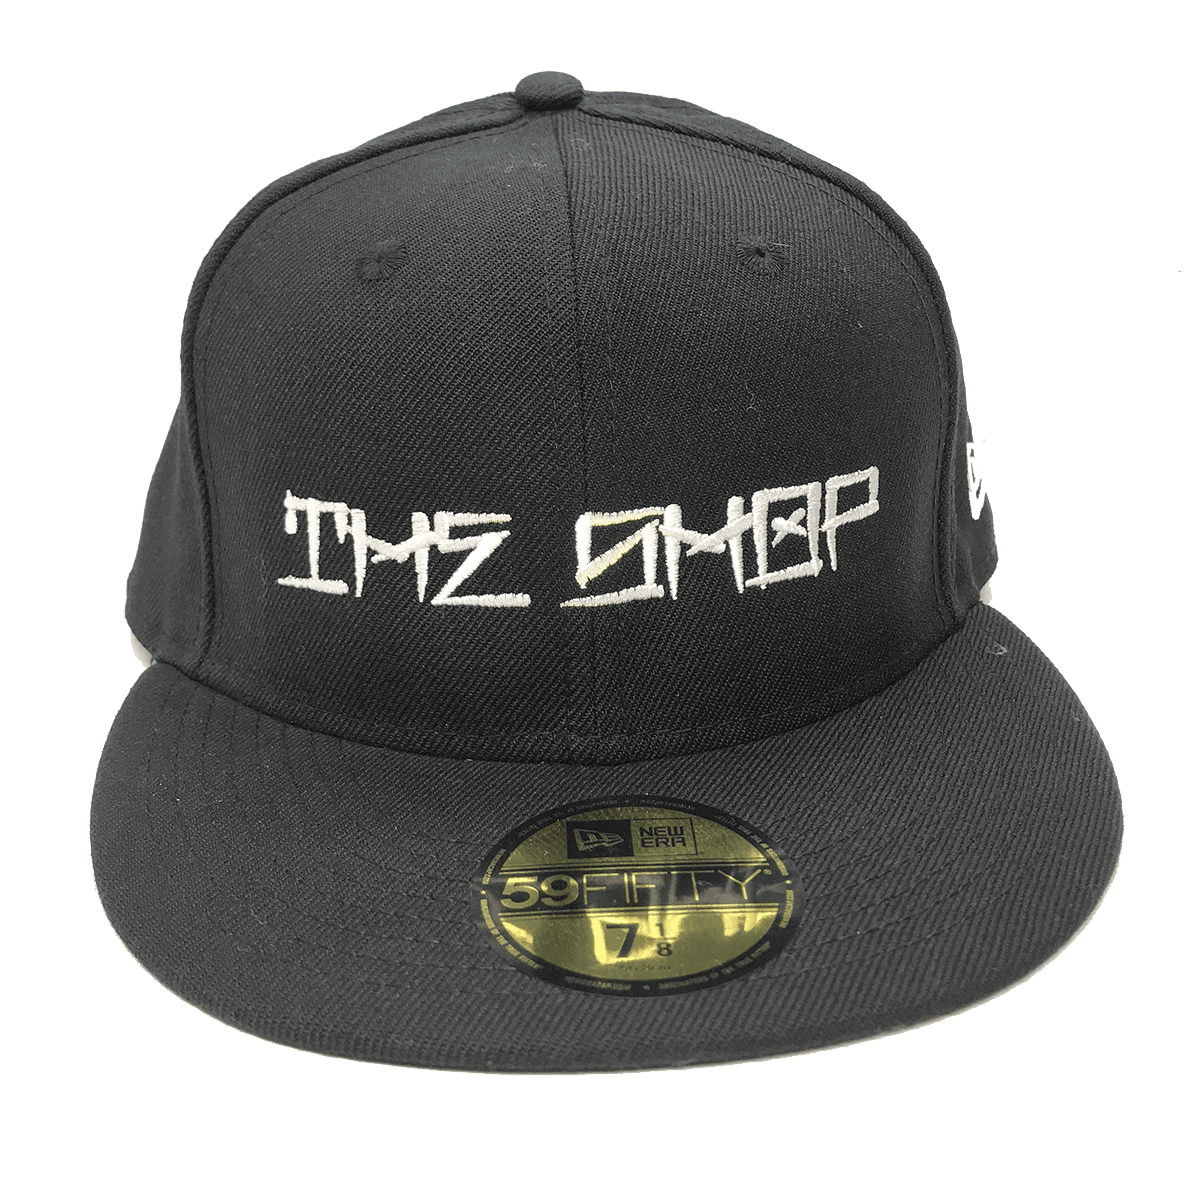 The Shop X New Era Fitted Hat - TSP The Shop